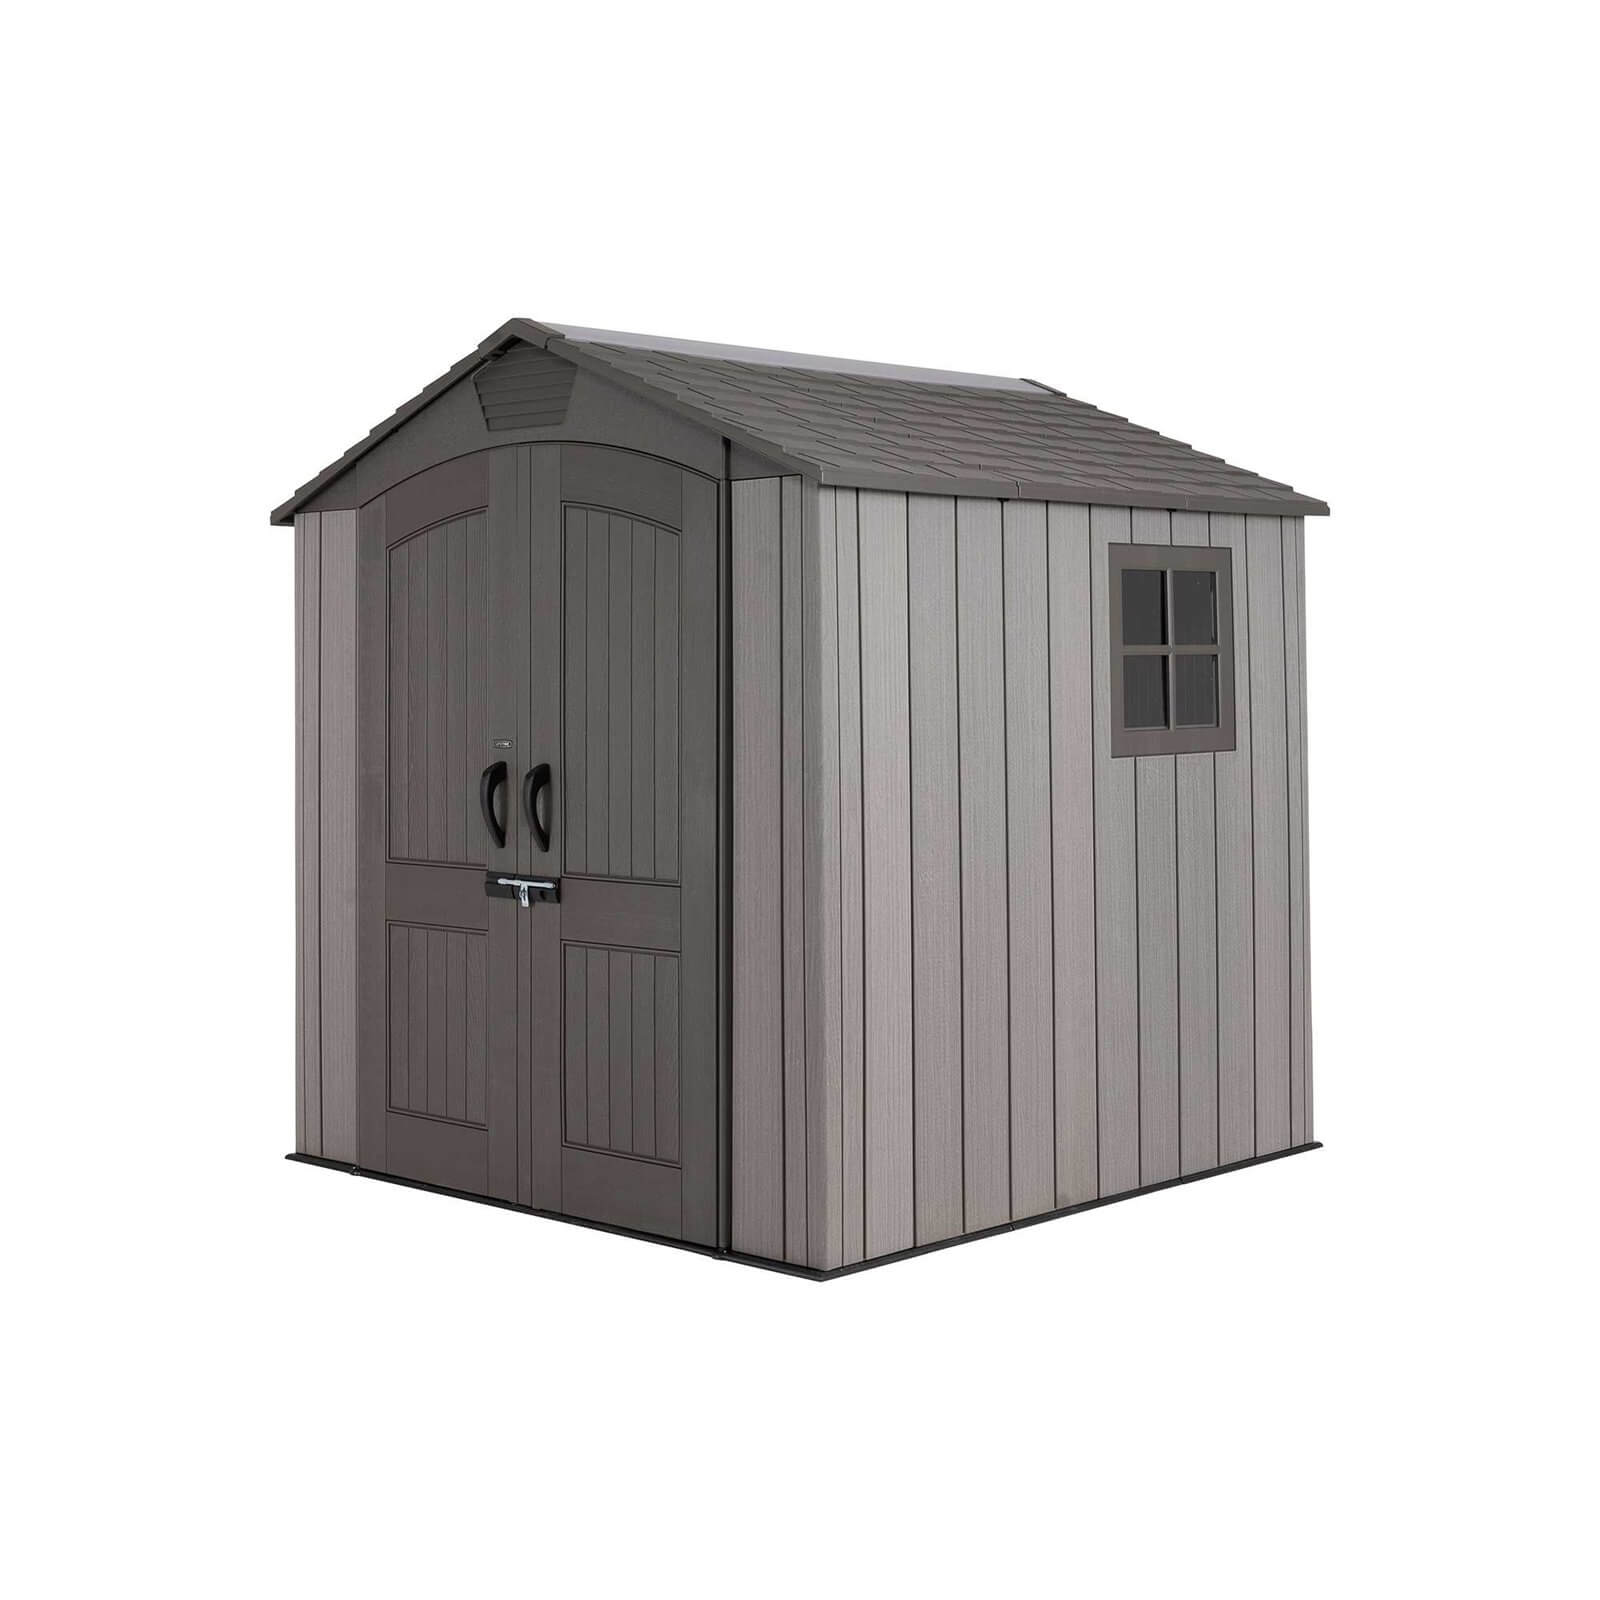 Lifetime 7x7ft Outdoor Storage Shed